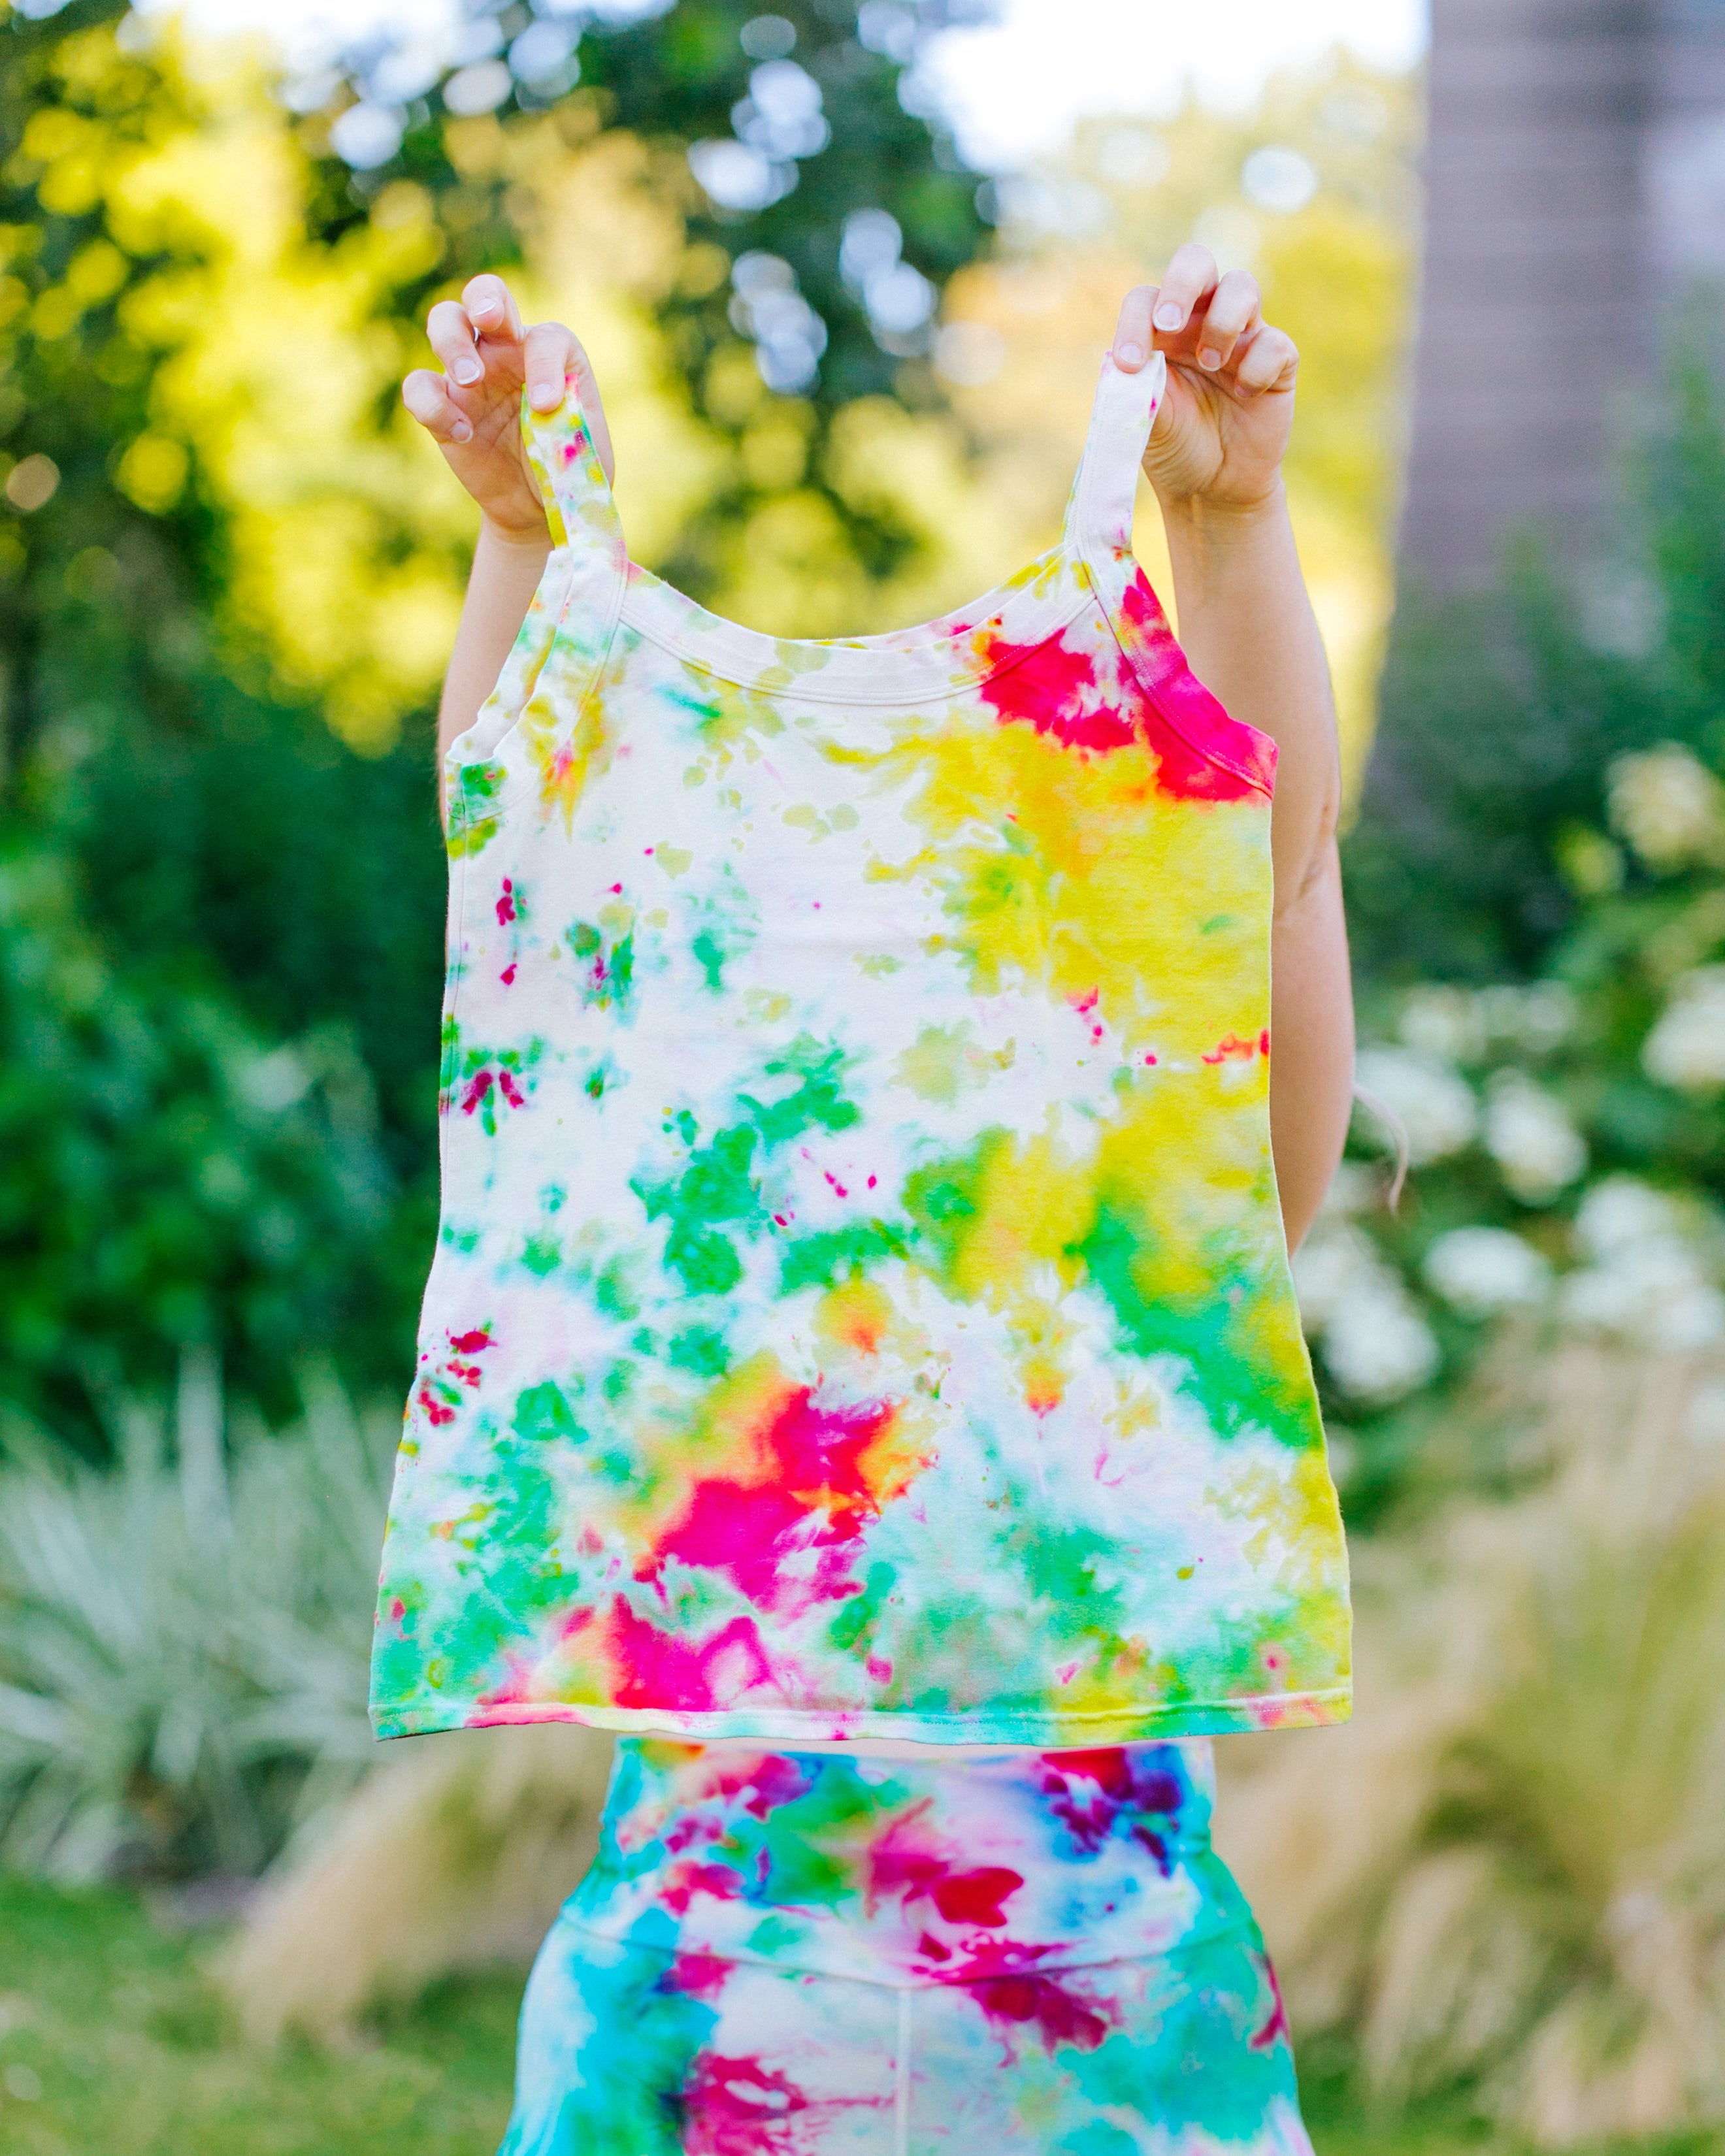 Model wearing Ice Dyed Bike Shorts holding up an Ice Dyed Camisole in a mix of green, pink, and yellow colors.